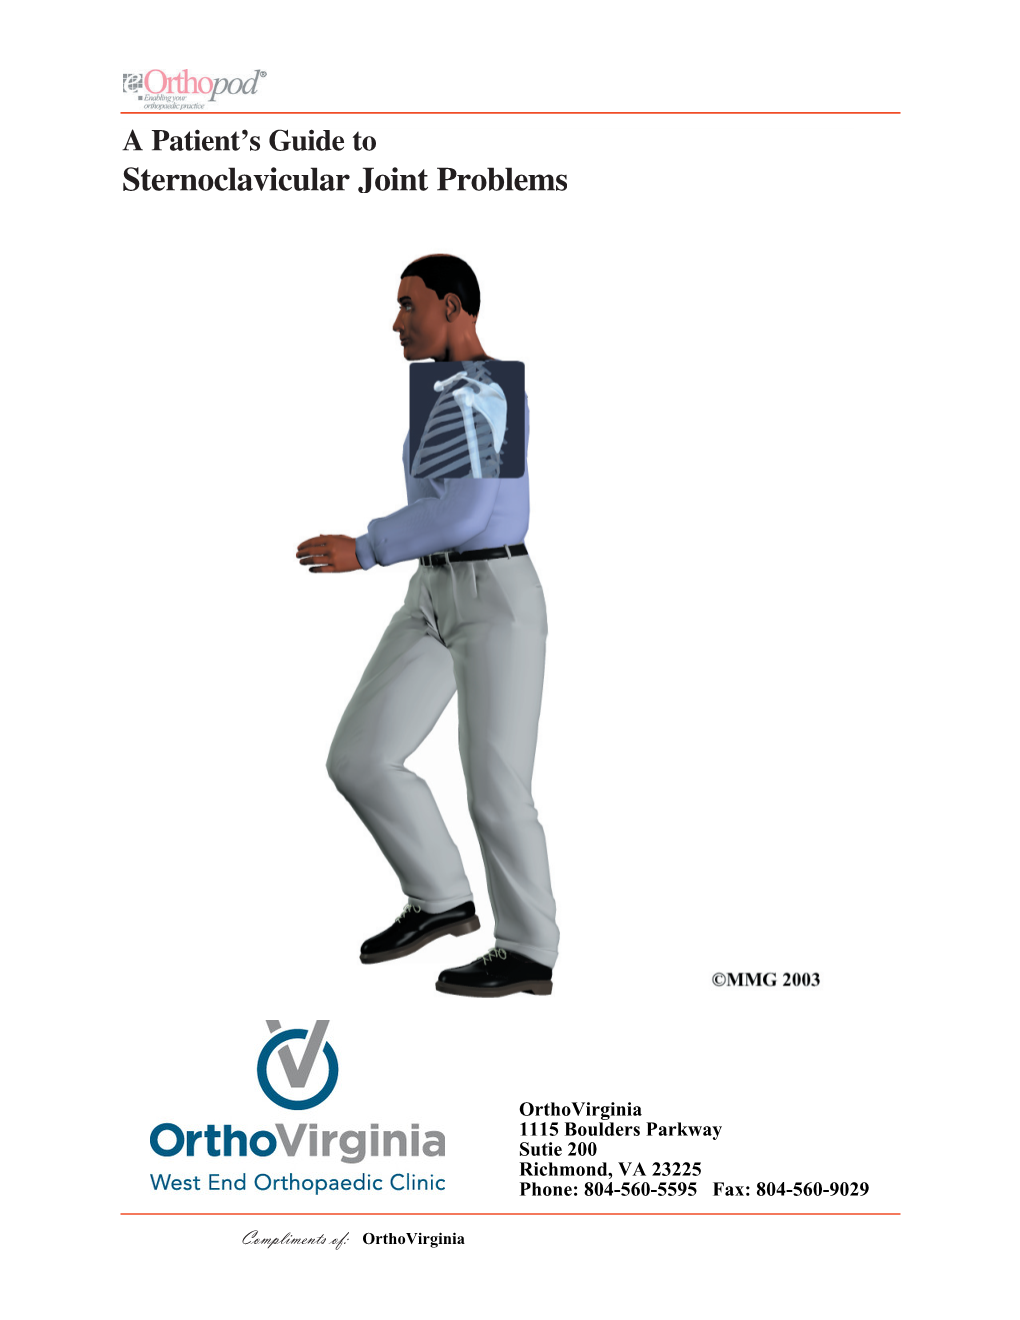 A Patient's Guide to Sternoclavicular Joint Problems